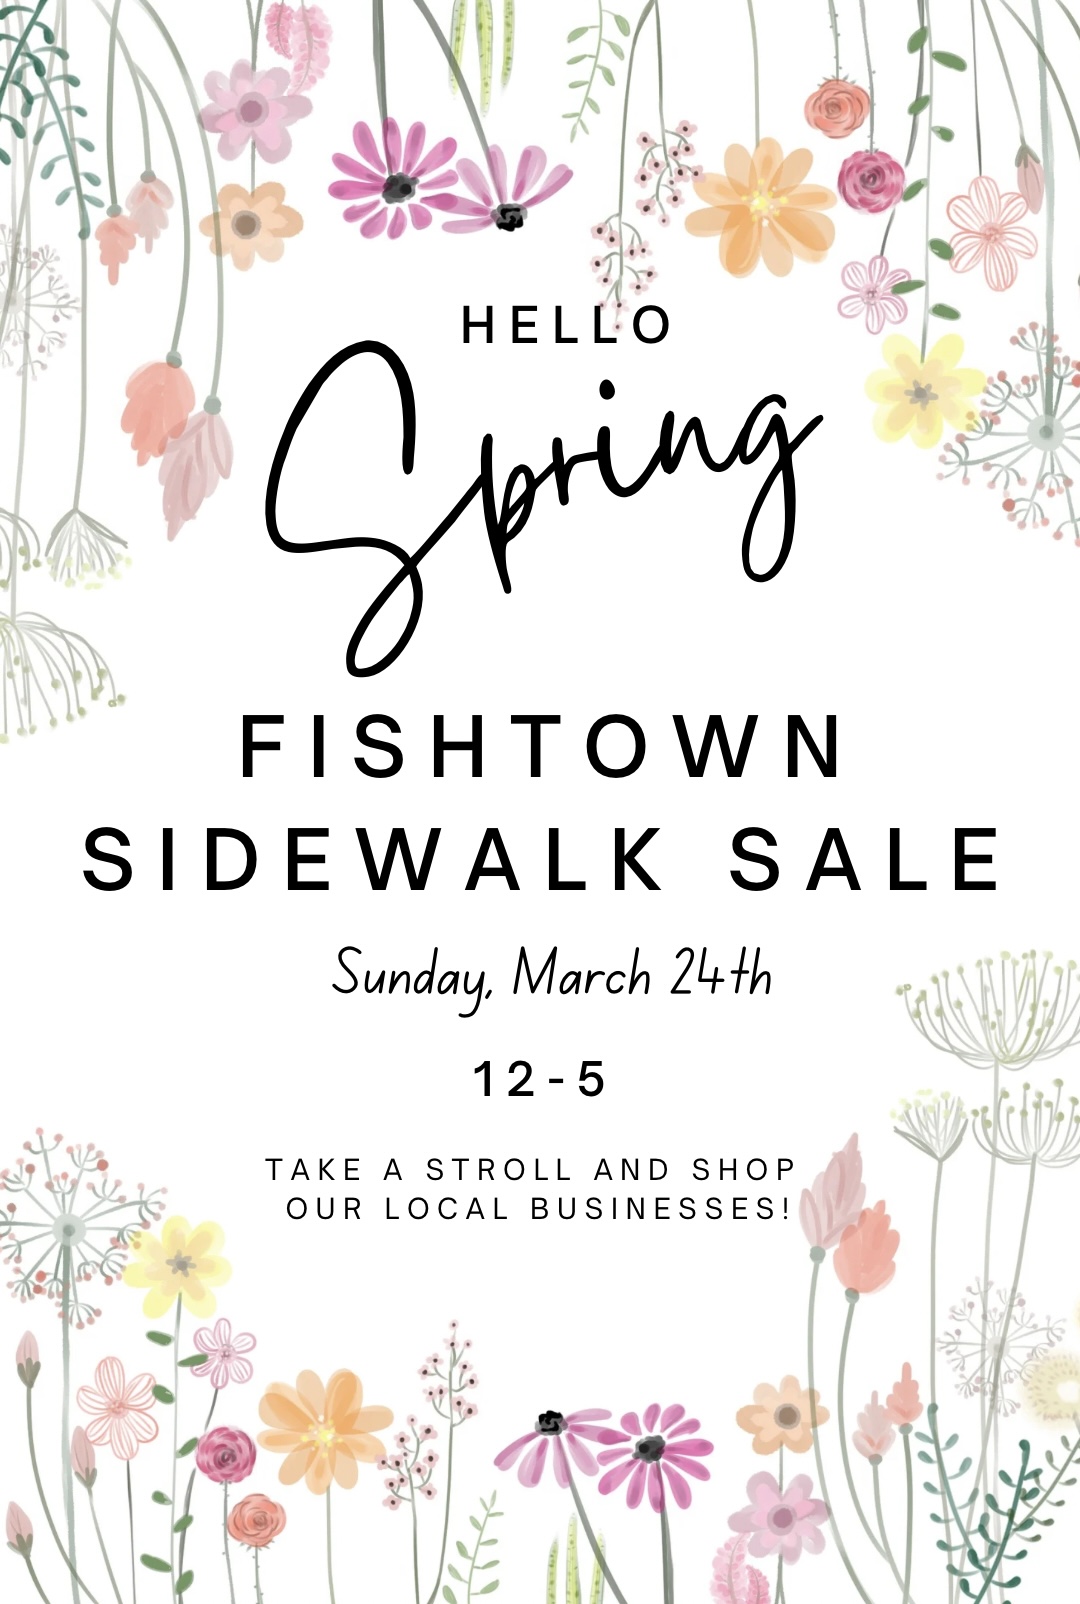 Fishtown District Spring Sidewalk Sale for clothes, jewelry, wellness, and more